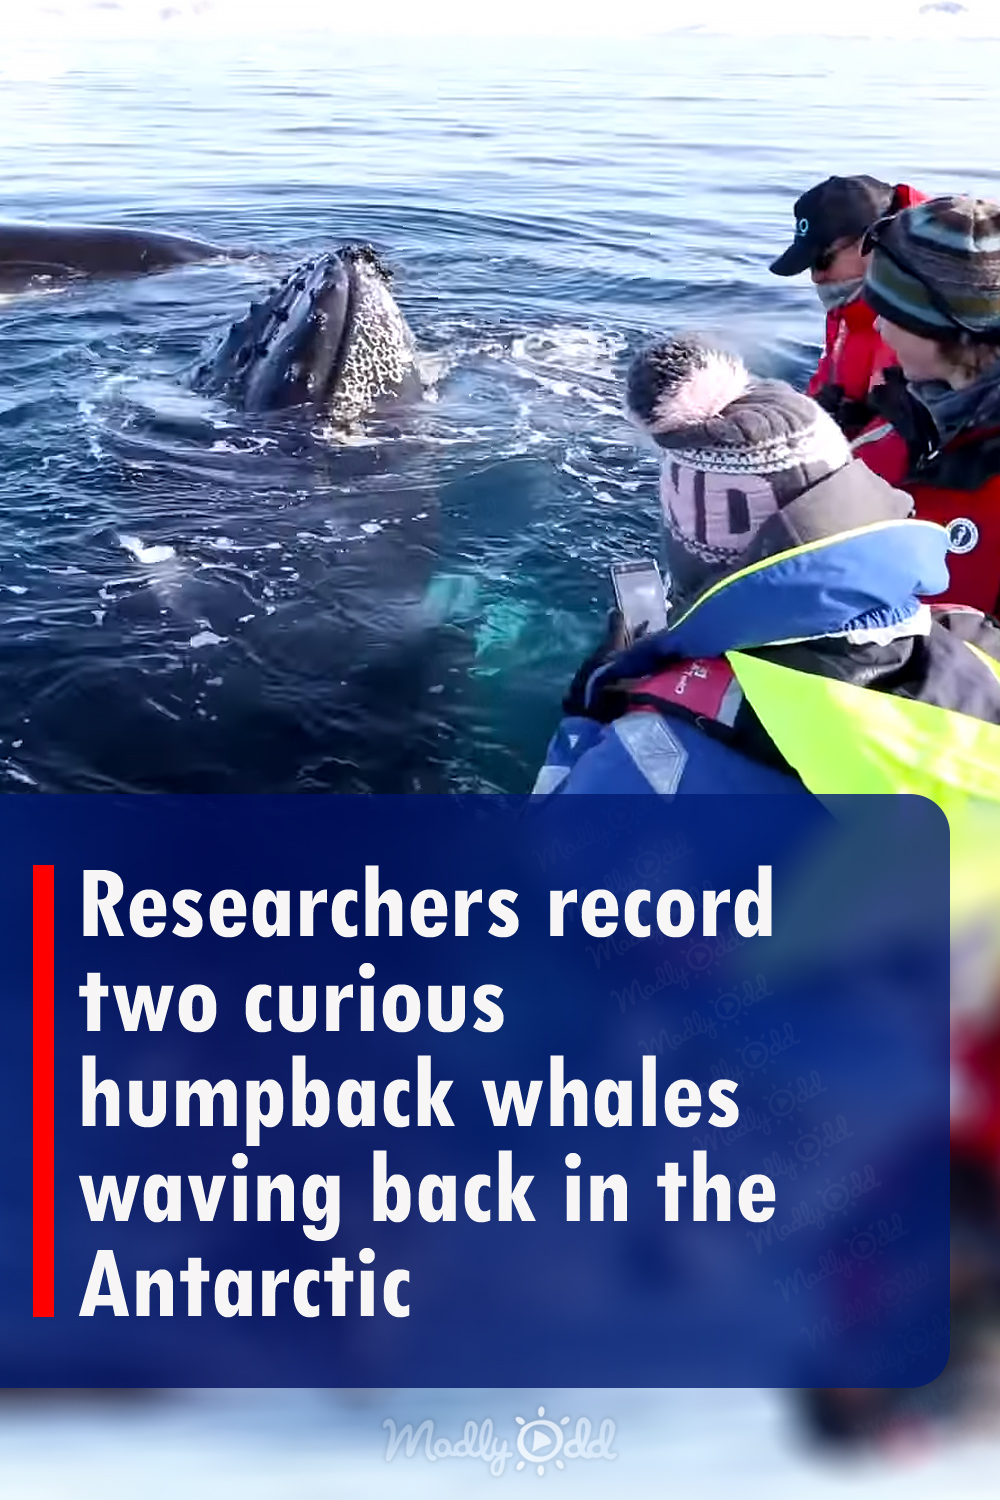 Researchers record two curious humpback whales waving back in the Antarctic